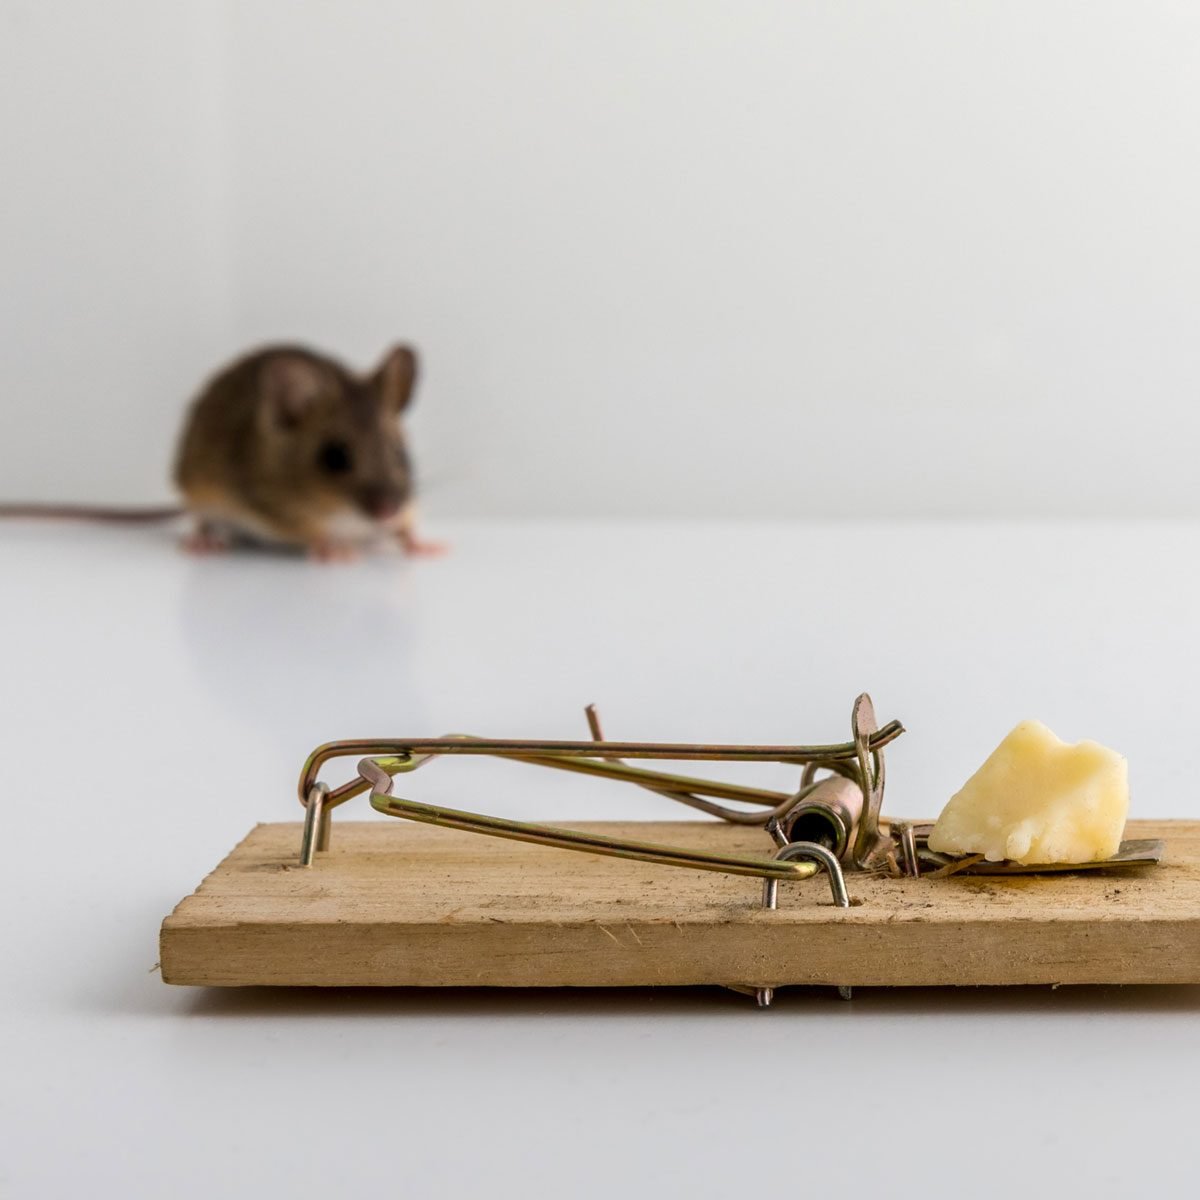 https://www.familyhandyman.com/wp-content/uploads/2021/02/mouse-trap-with-cheese-GettyImages-1030568128.jpg